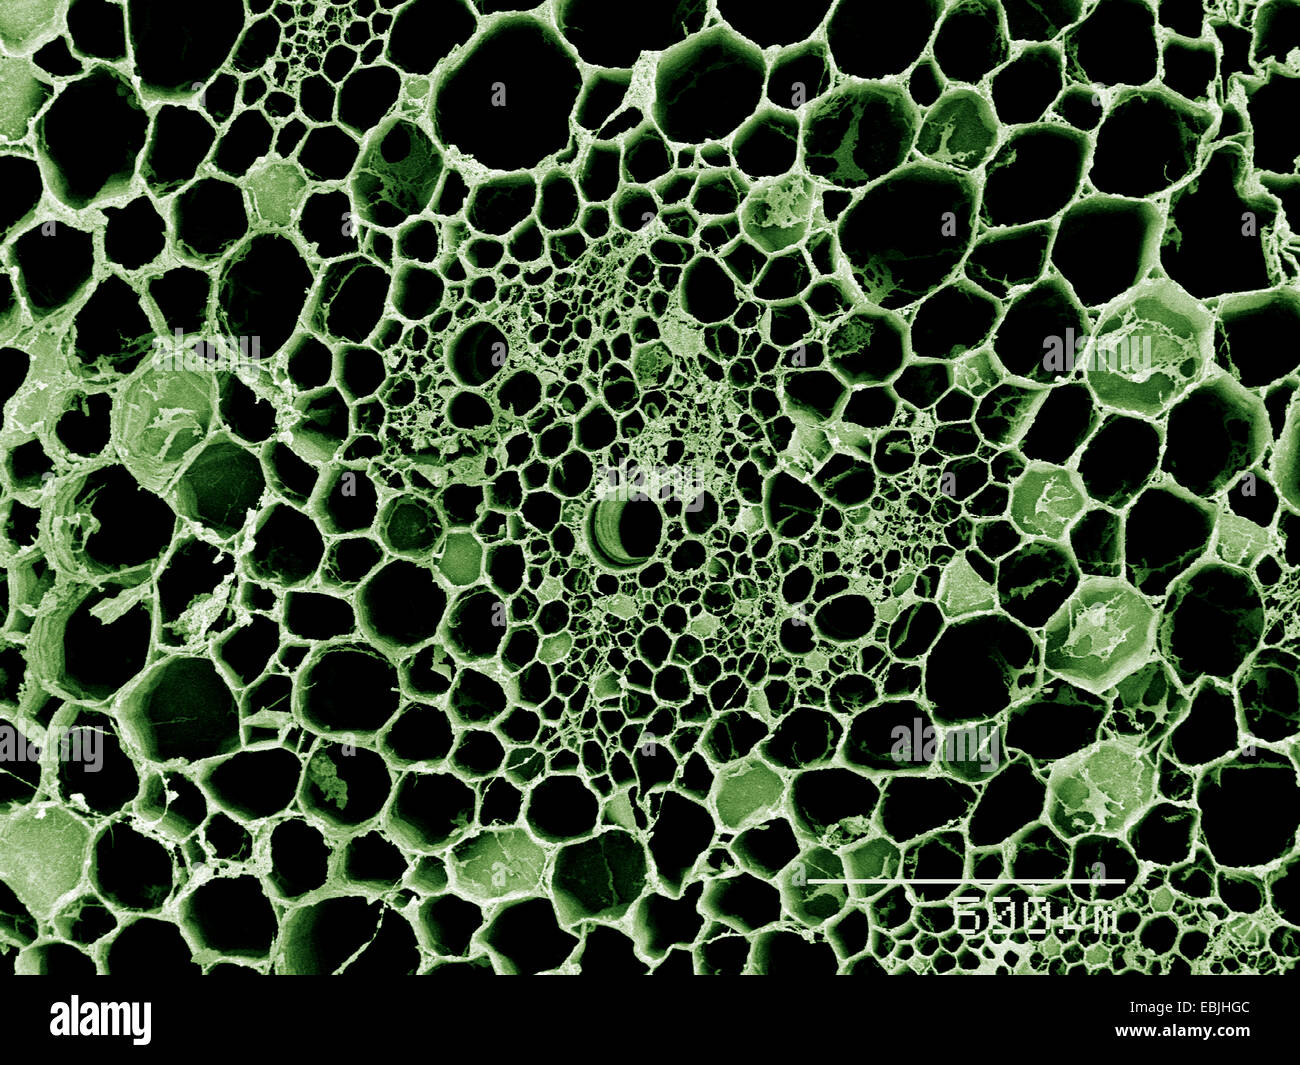 Cross section of stem of Peruvian Lily SEM Stock Photo